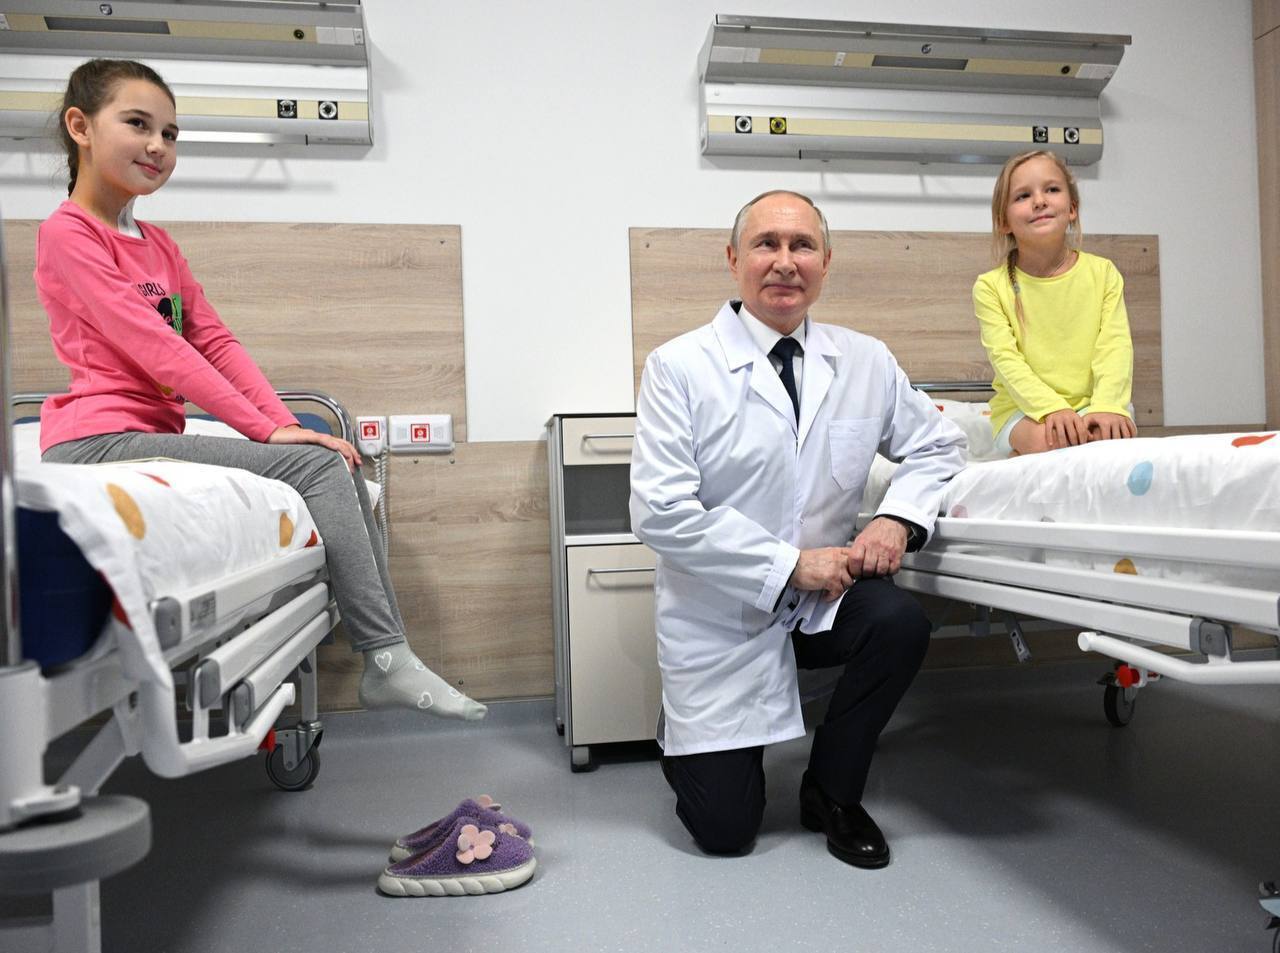 Kneeling down and giving a helicopter toy as a gift, Putin staged a ''circus'' with children at the medical center and was mocked on the internet. Video